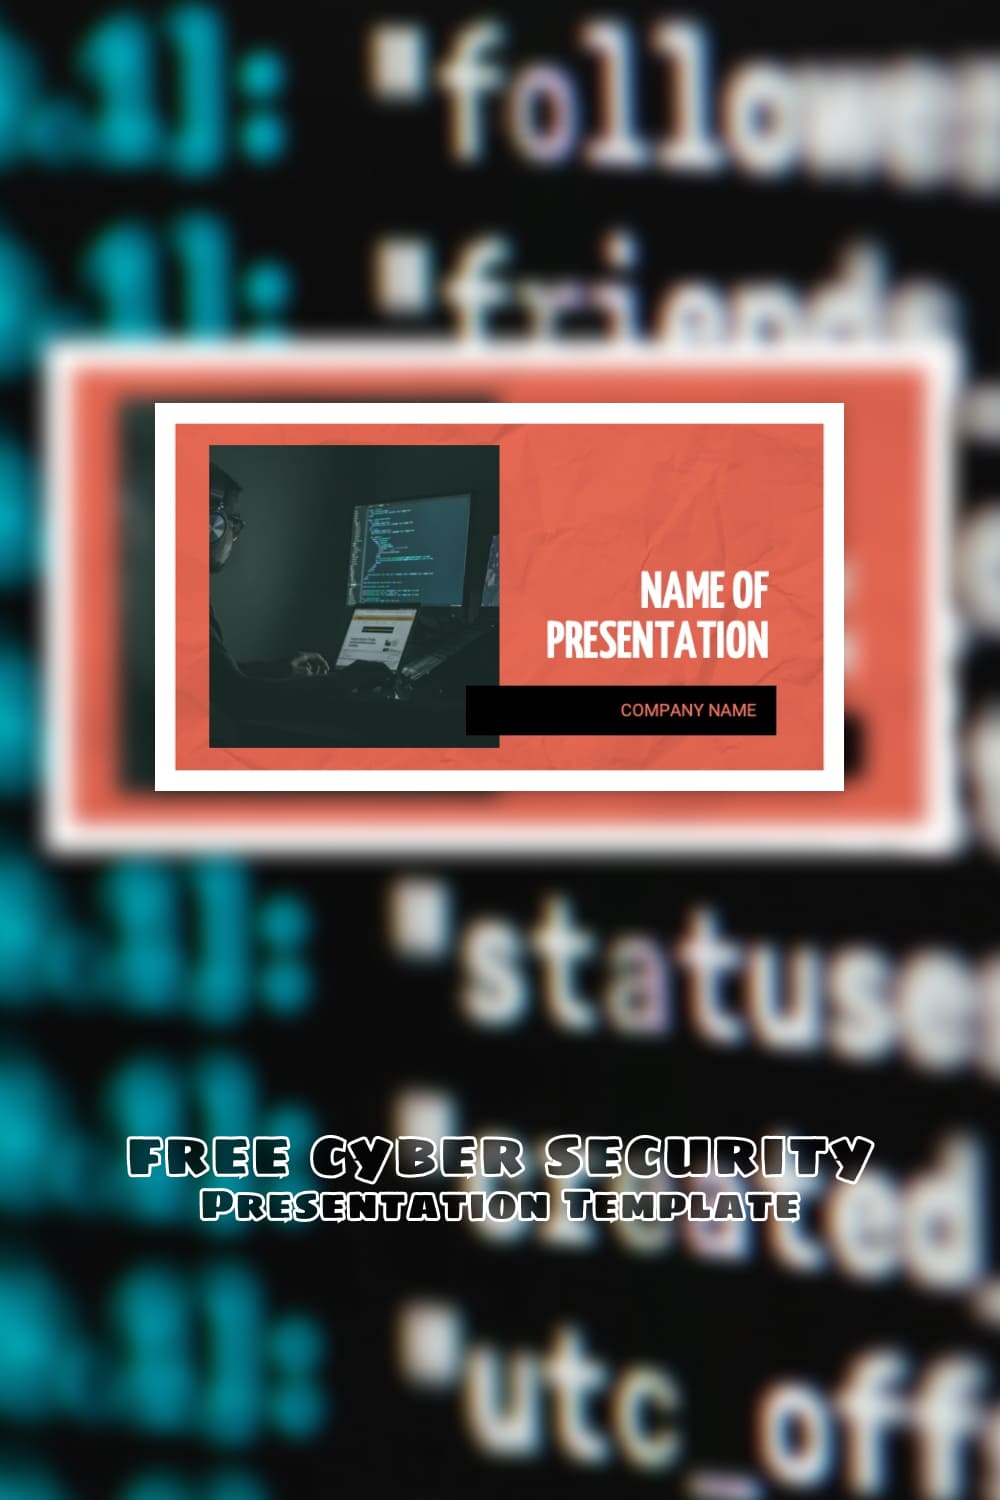 Free cyber security powerpoint template - pinterest image preview.